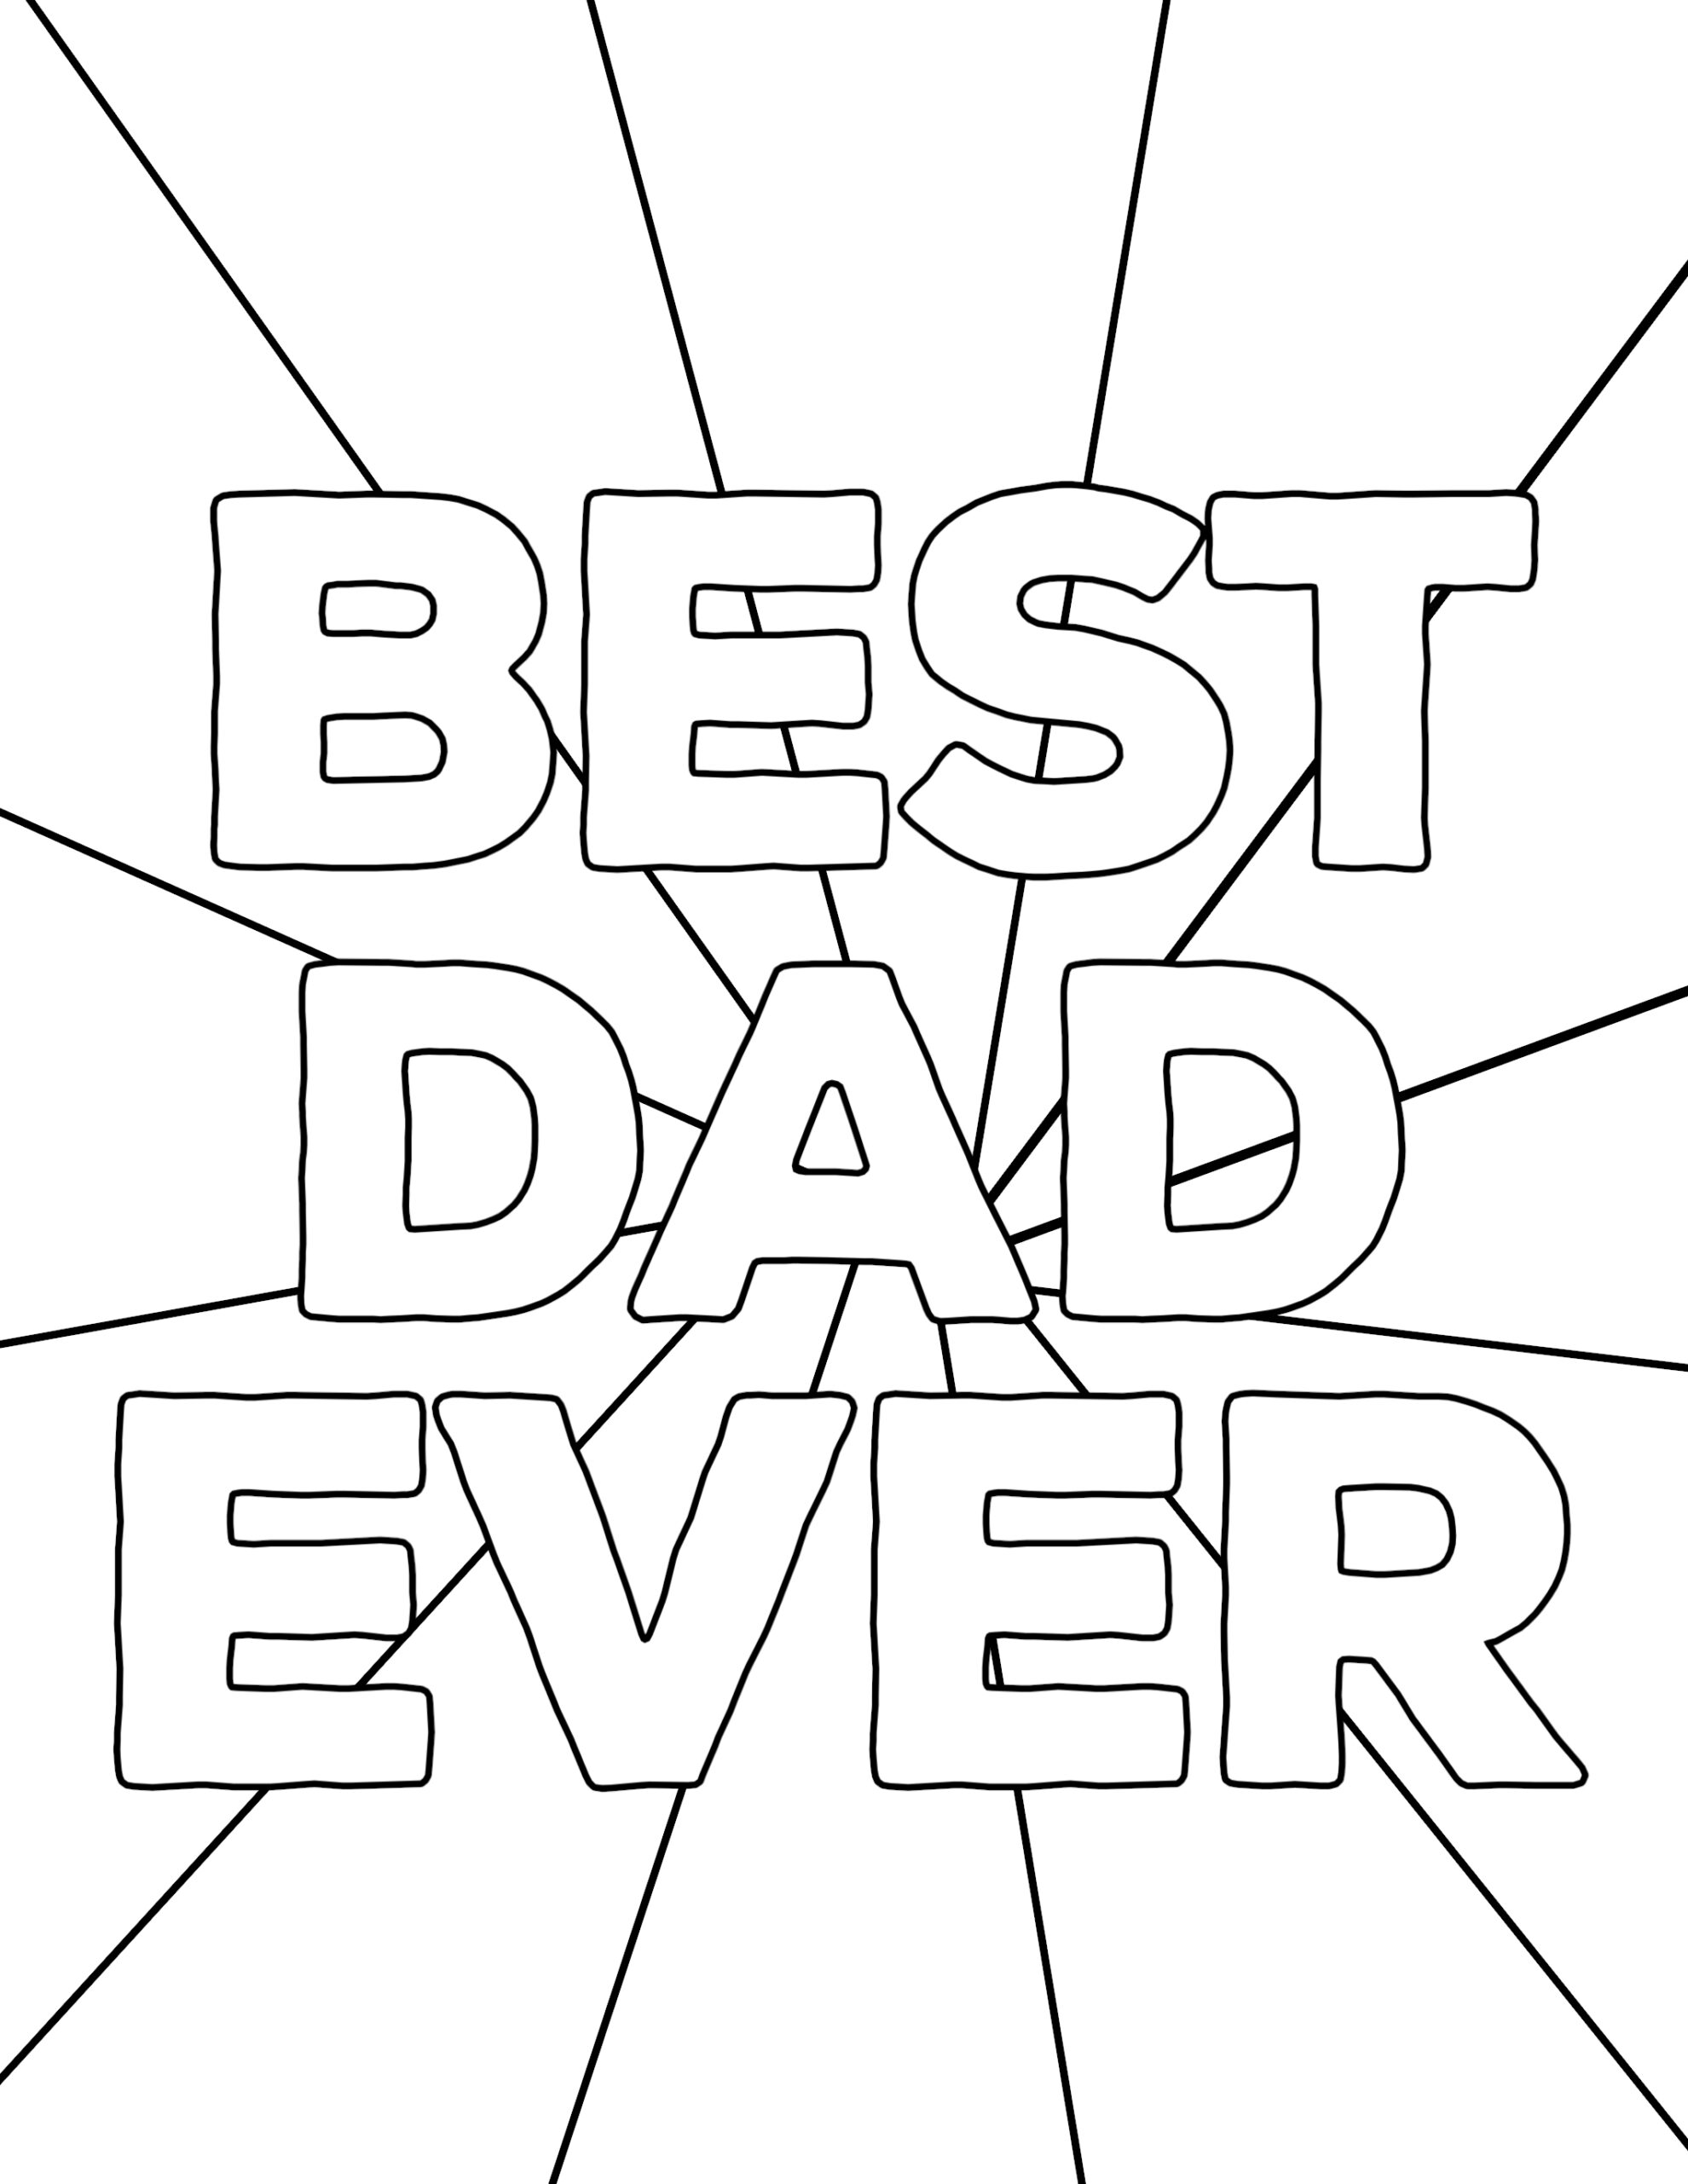 Download Happy Father S Day Coloring Pages Free Printables Paper Trail Design